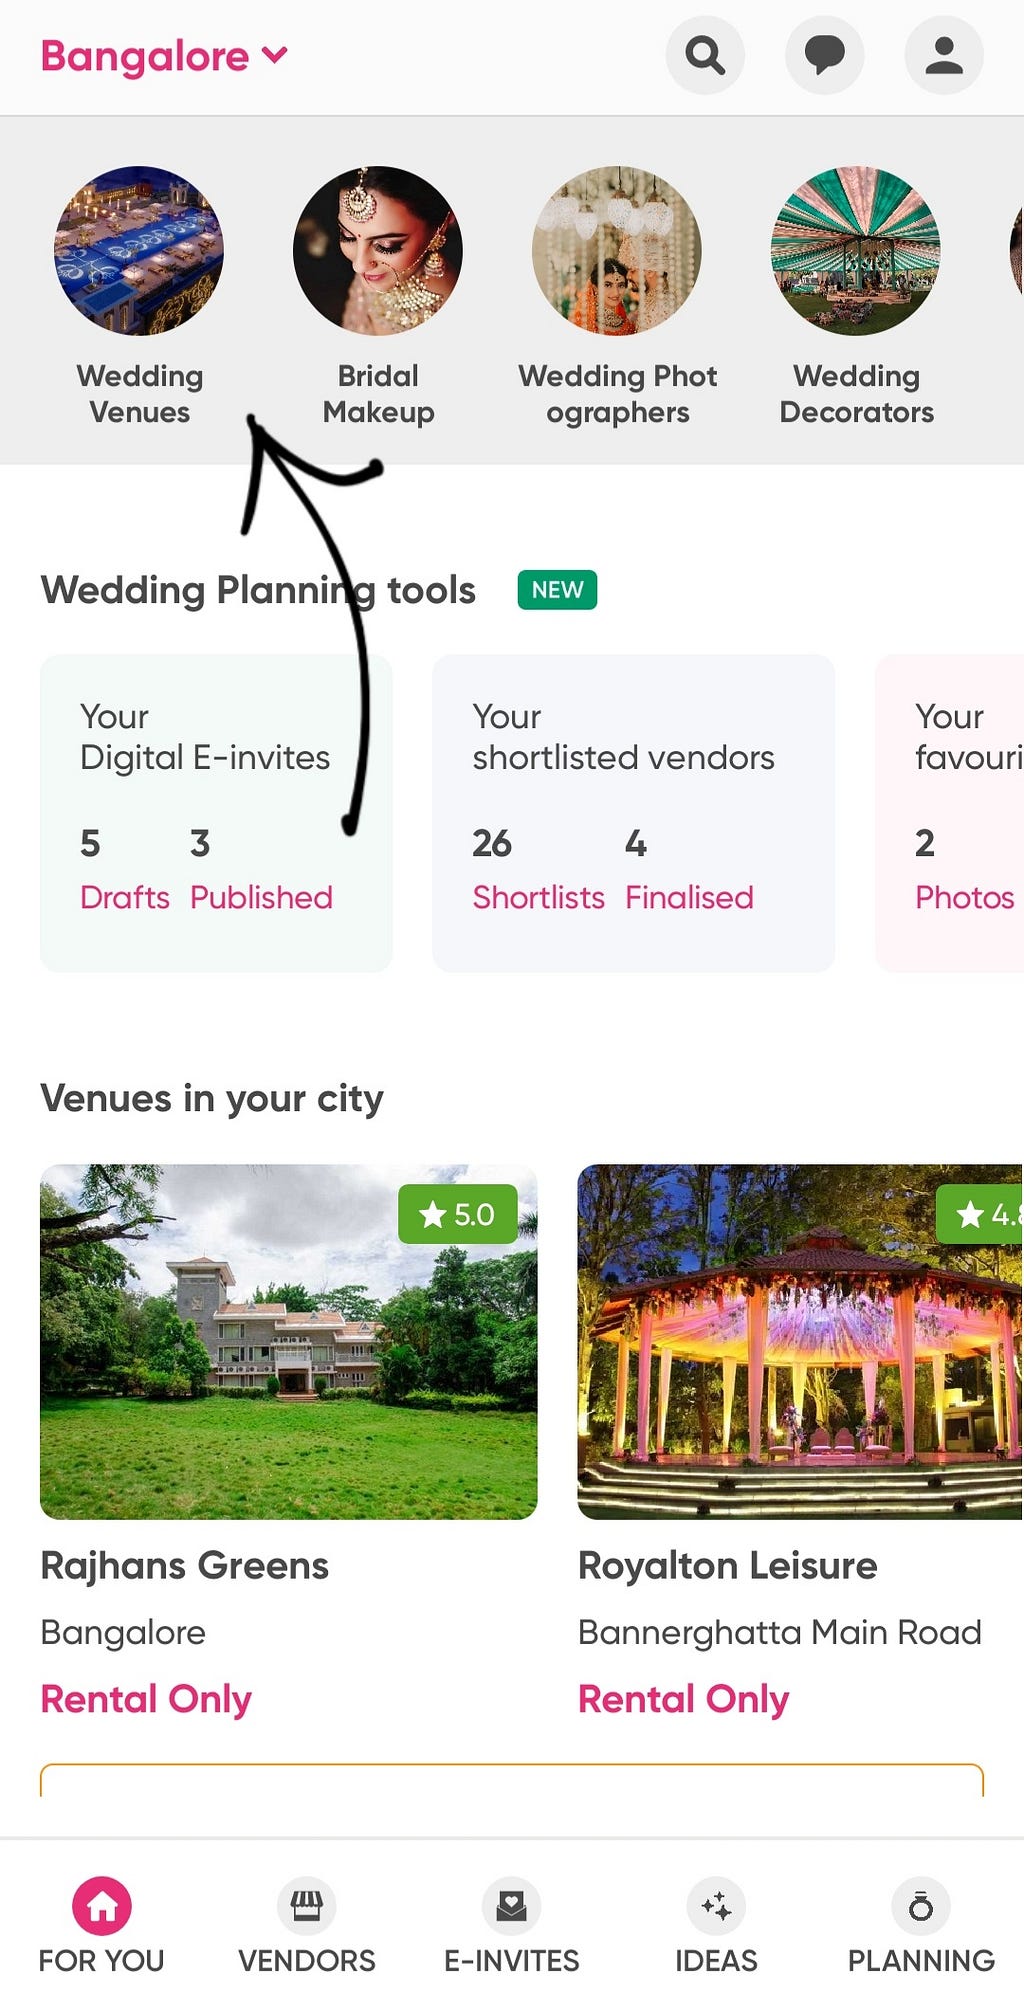 Homepage of the app with the vendor categories shown on top